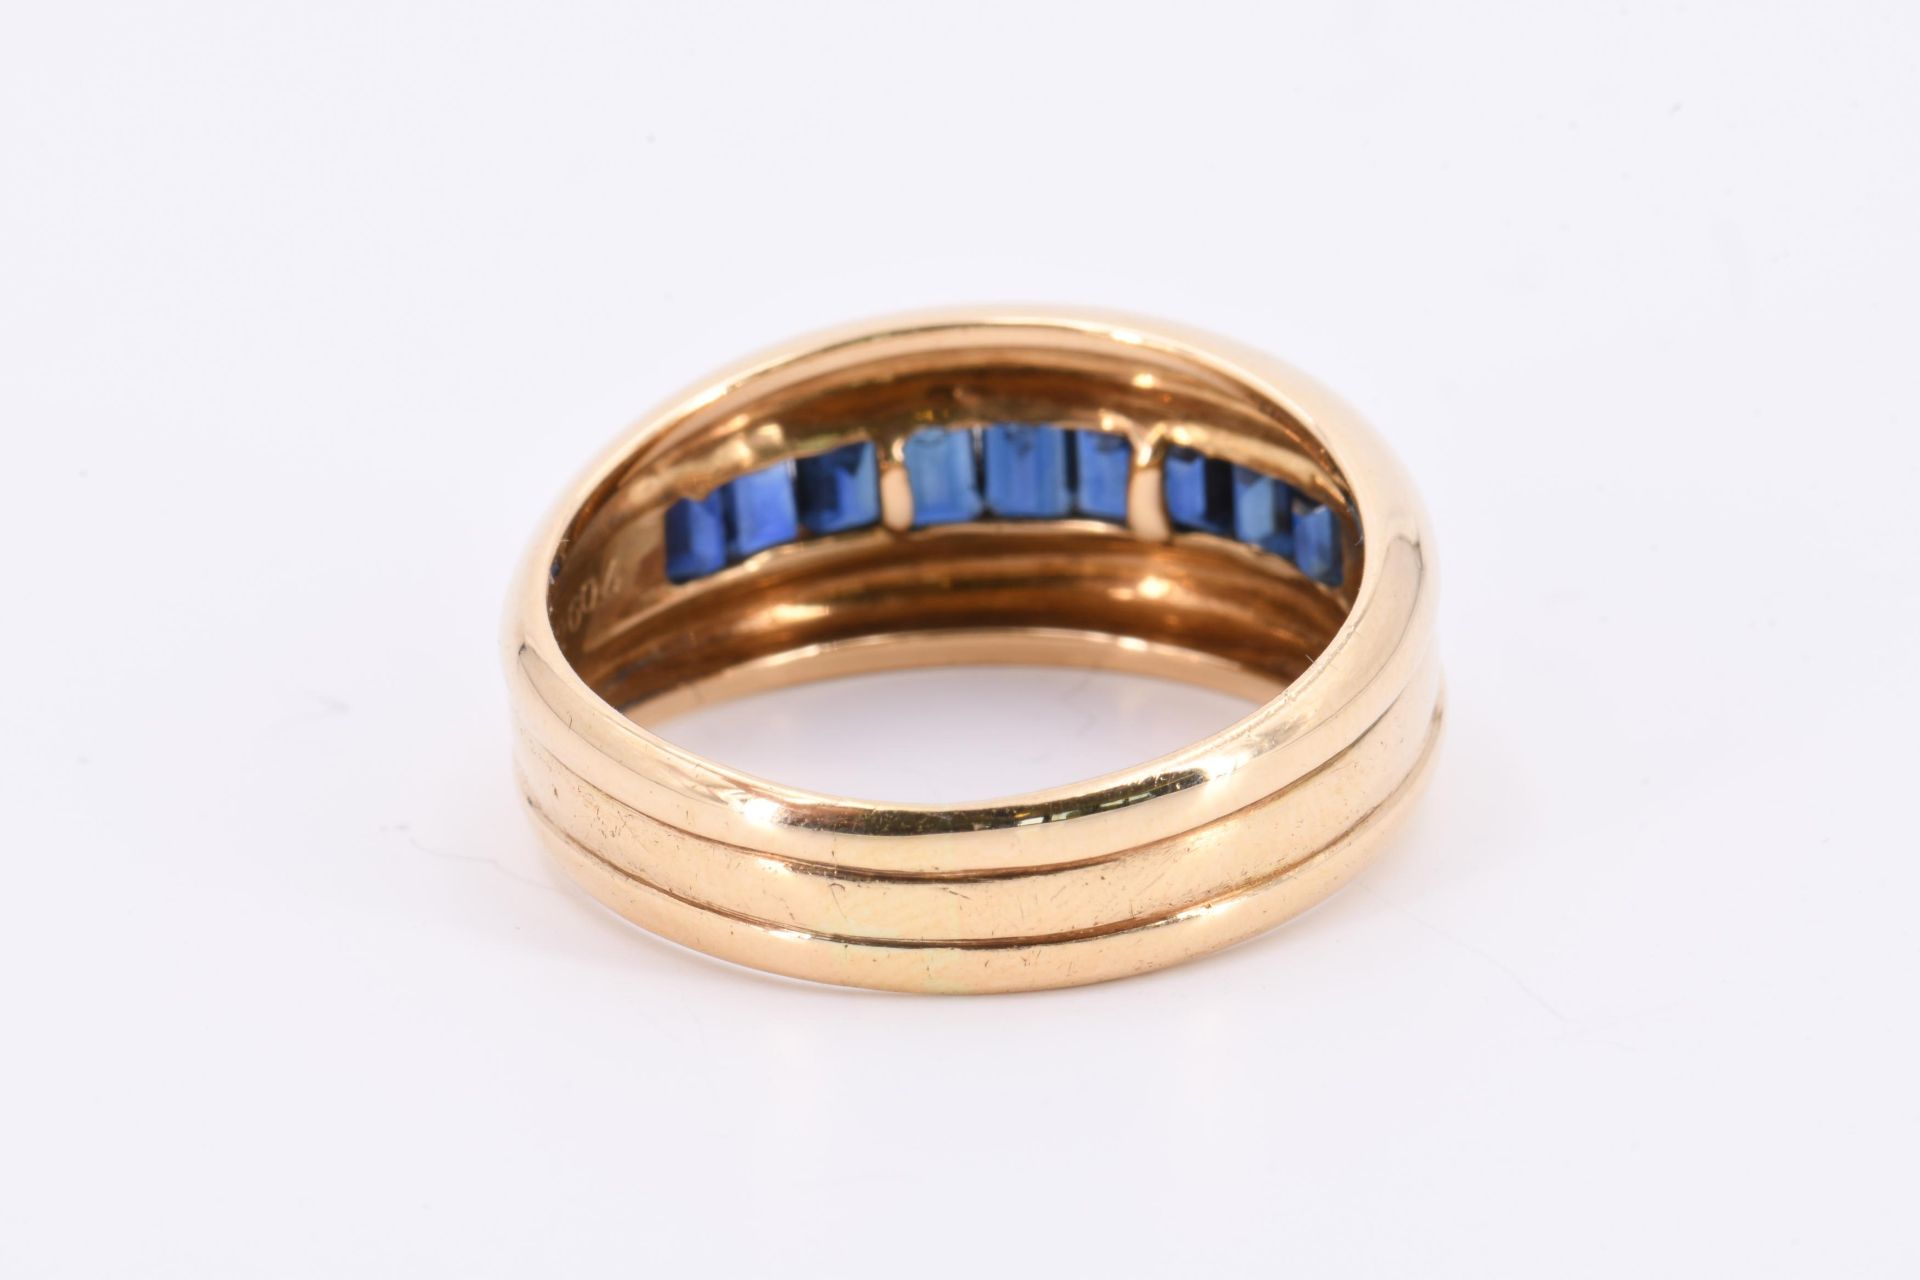 Sapphire ring - Image 4 of 7